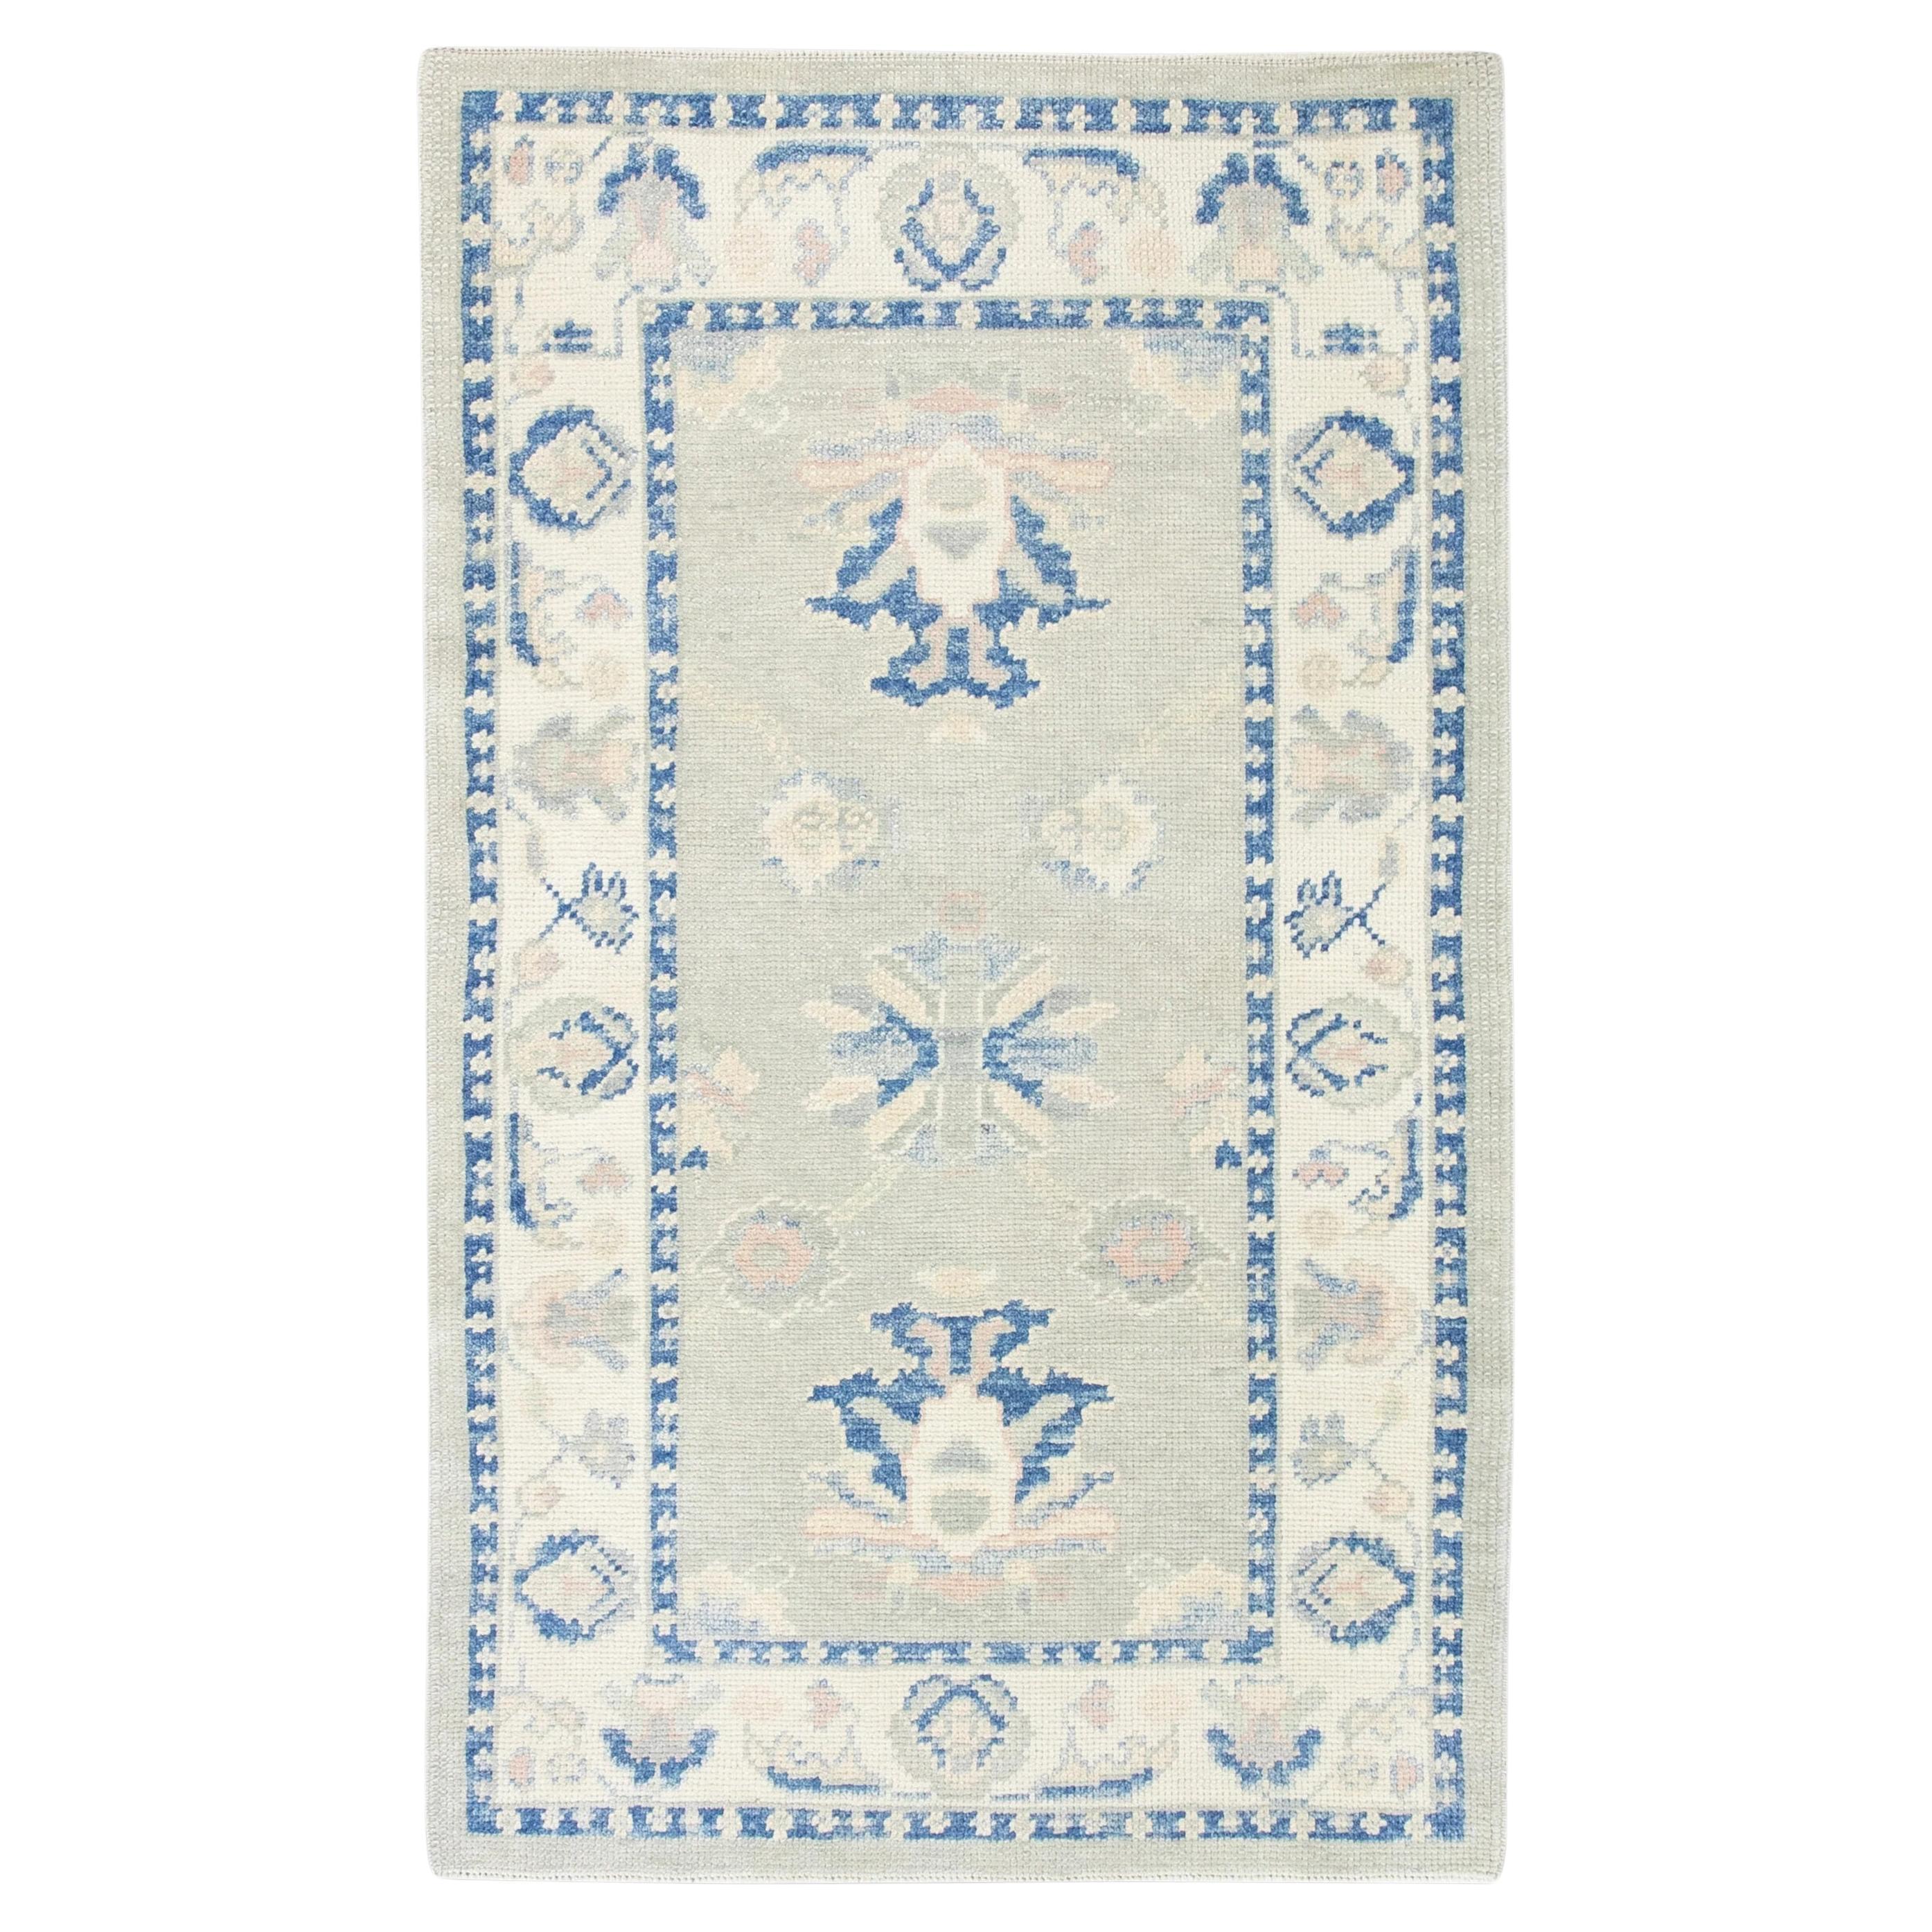 Green Handwoven Wool Turkish Oushak Rug in Blue Floral Pattern 3' x 4'11"